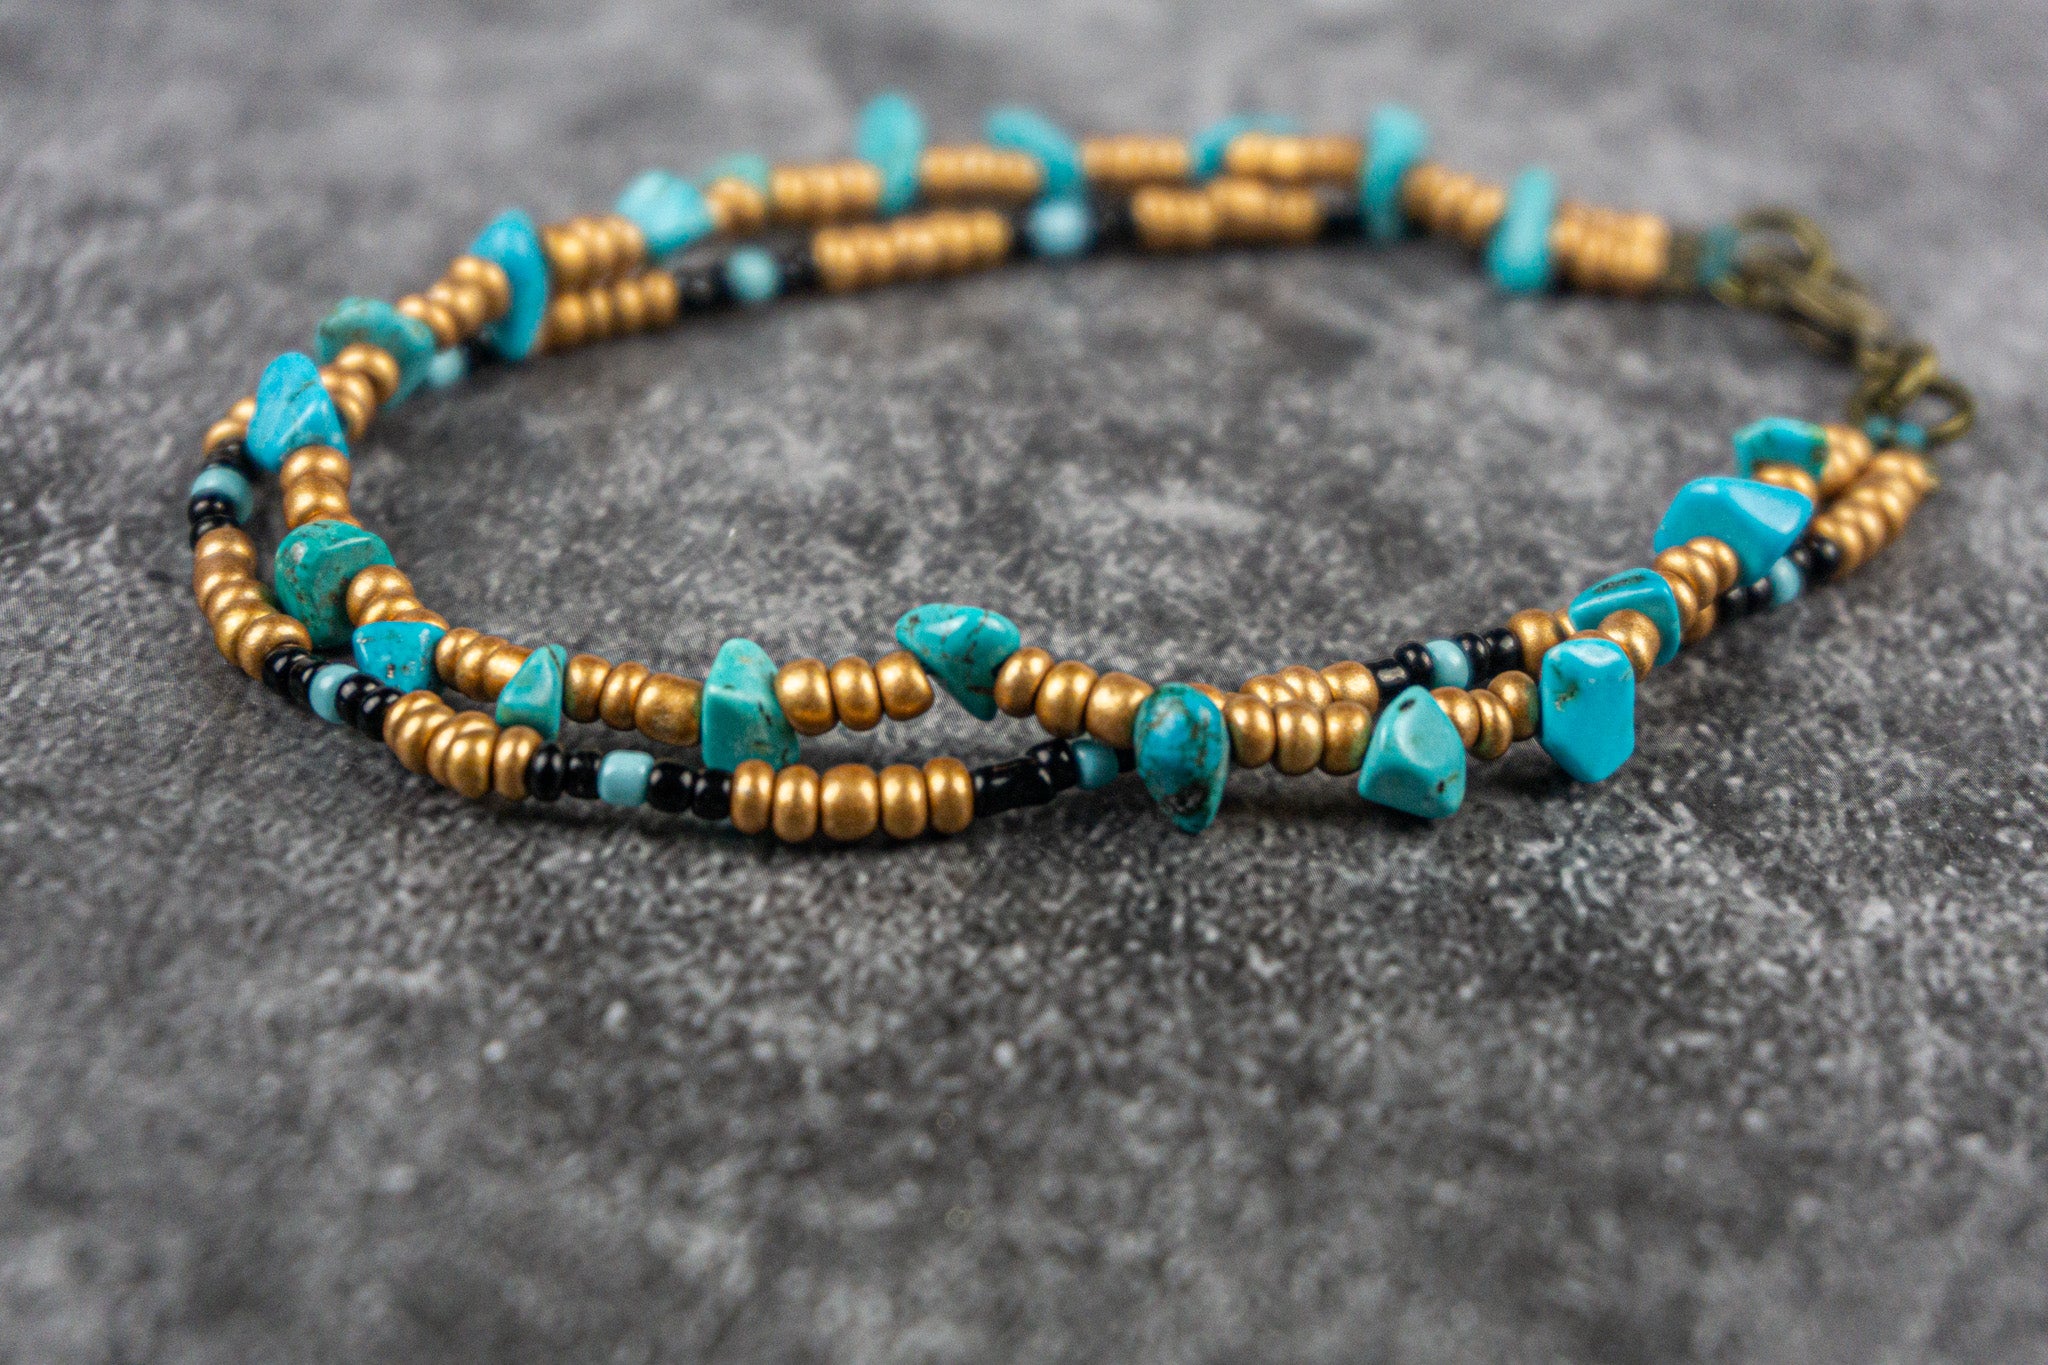  boho chic golden beads and turquoise stones layered wrap anklet set- wander jewellery